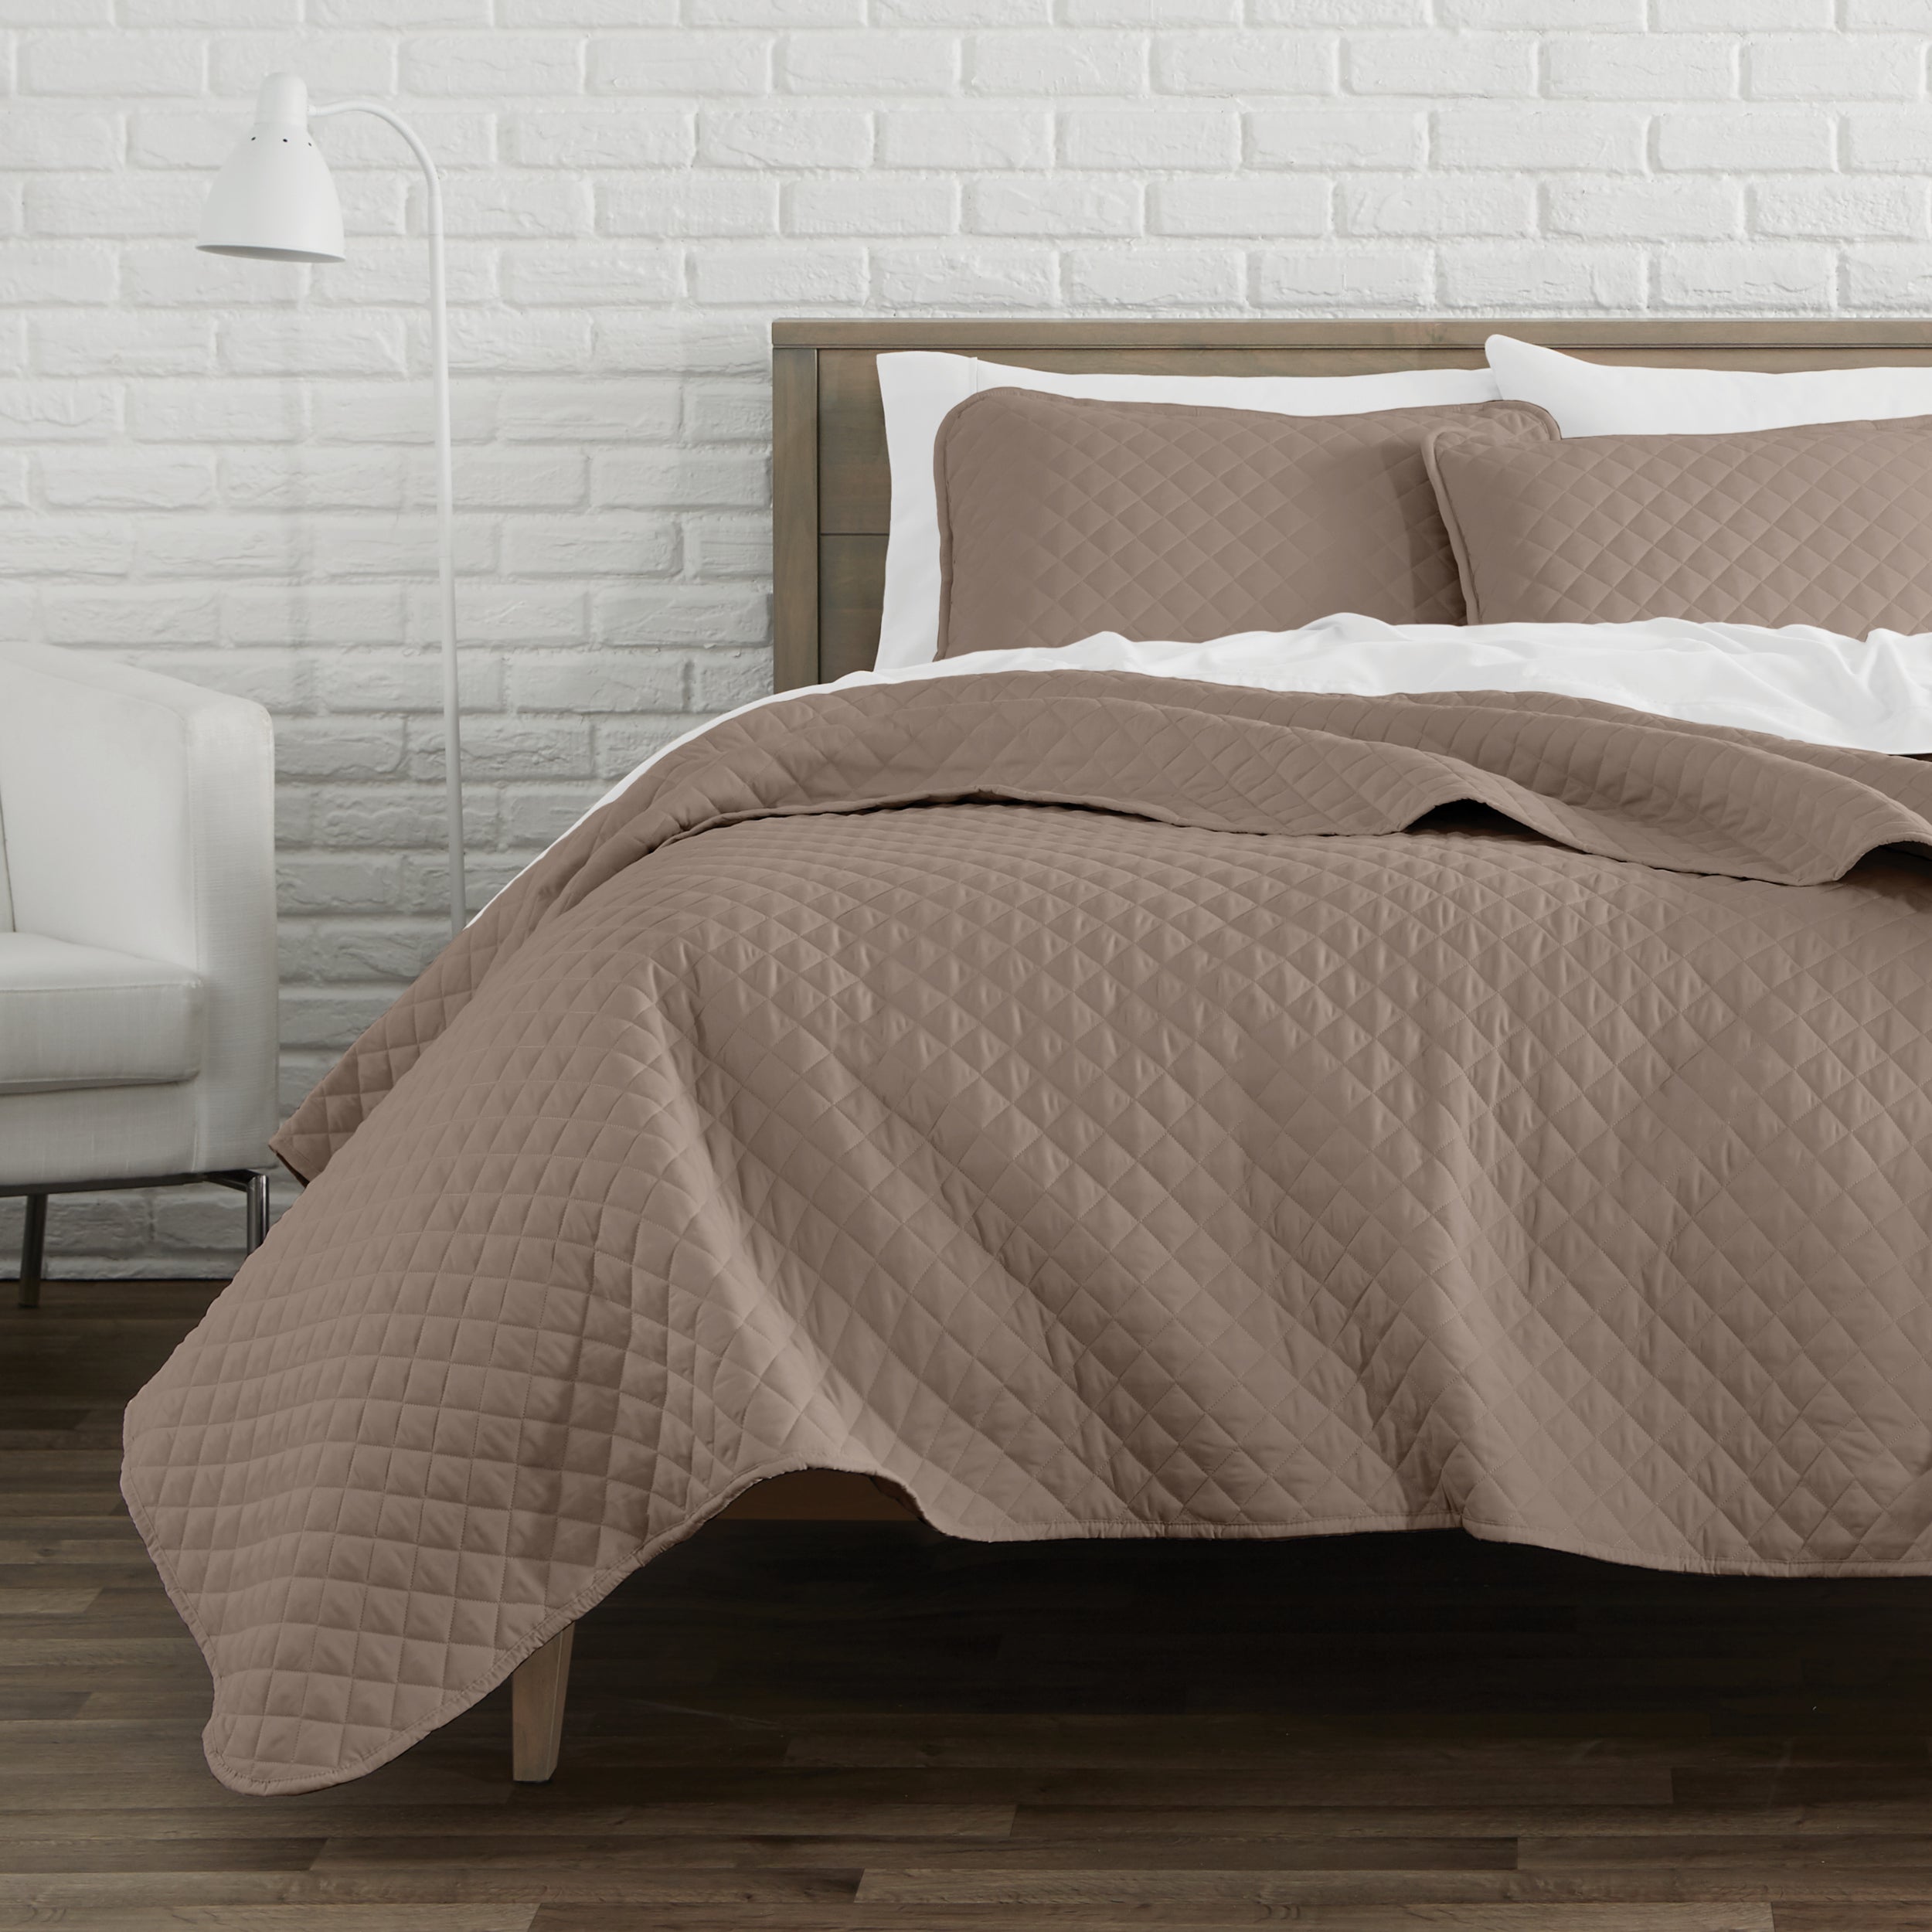 IMAGES-Extended_Content-Coverlet_Set.jpg